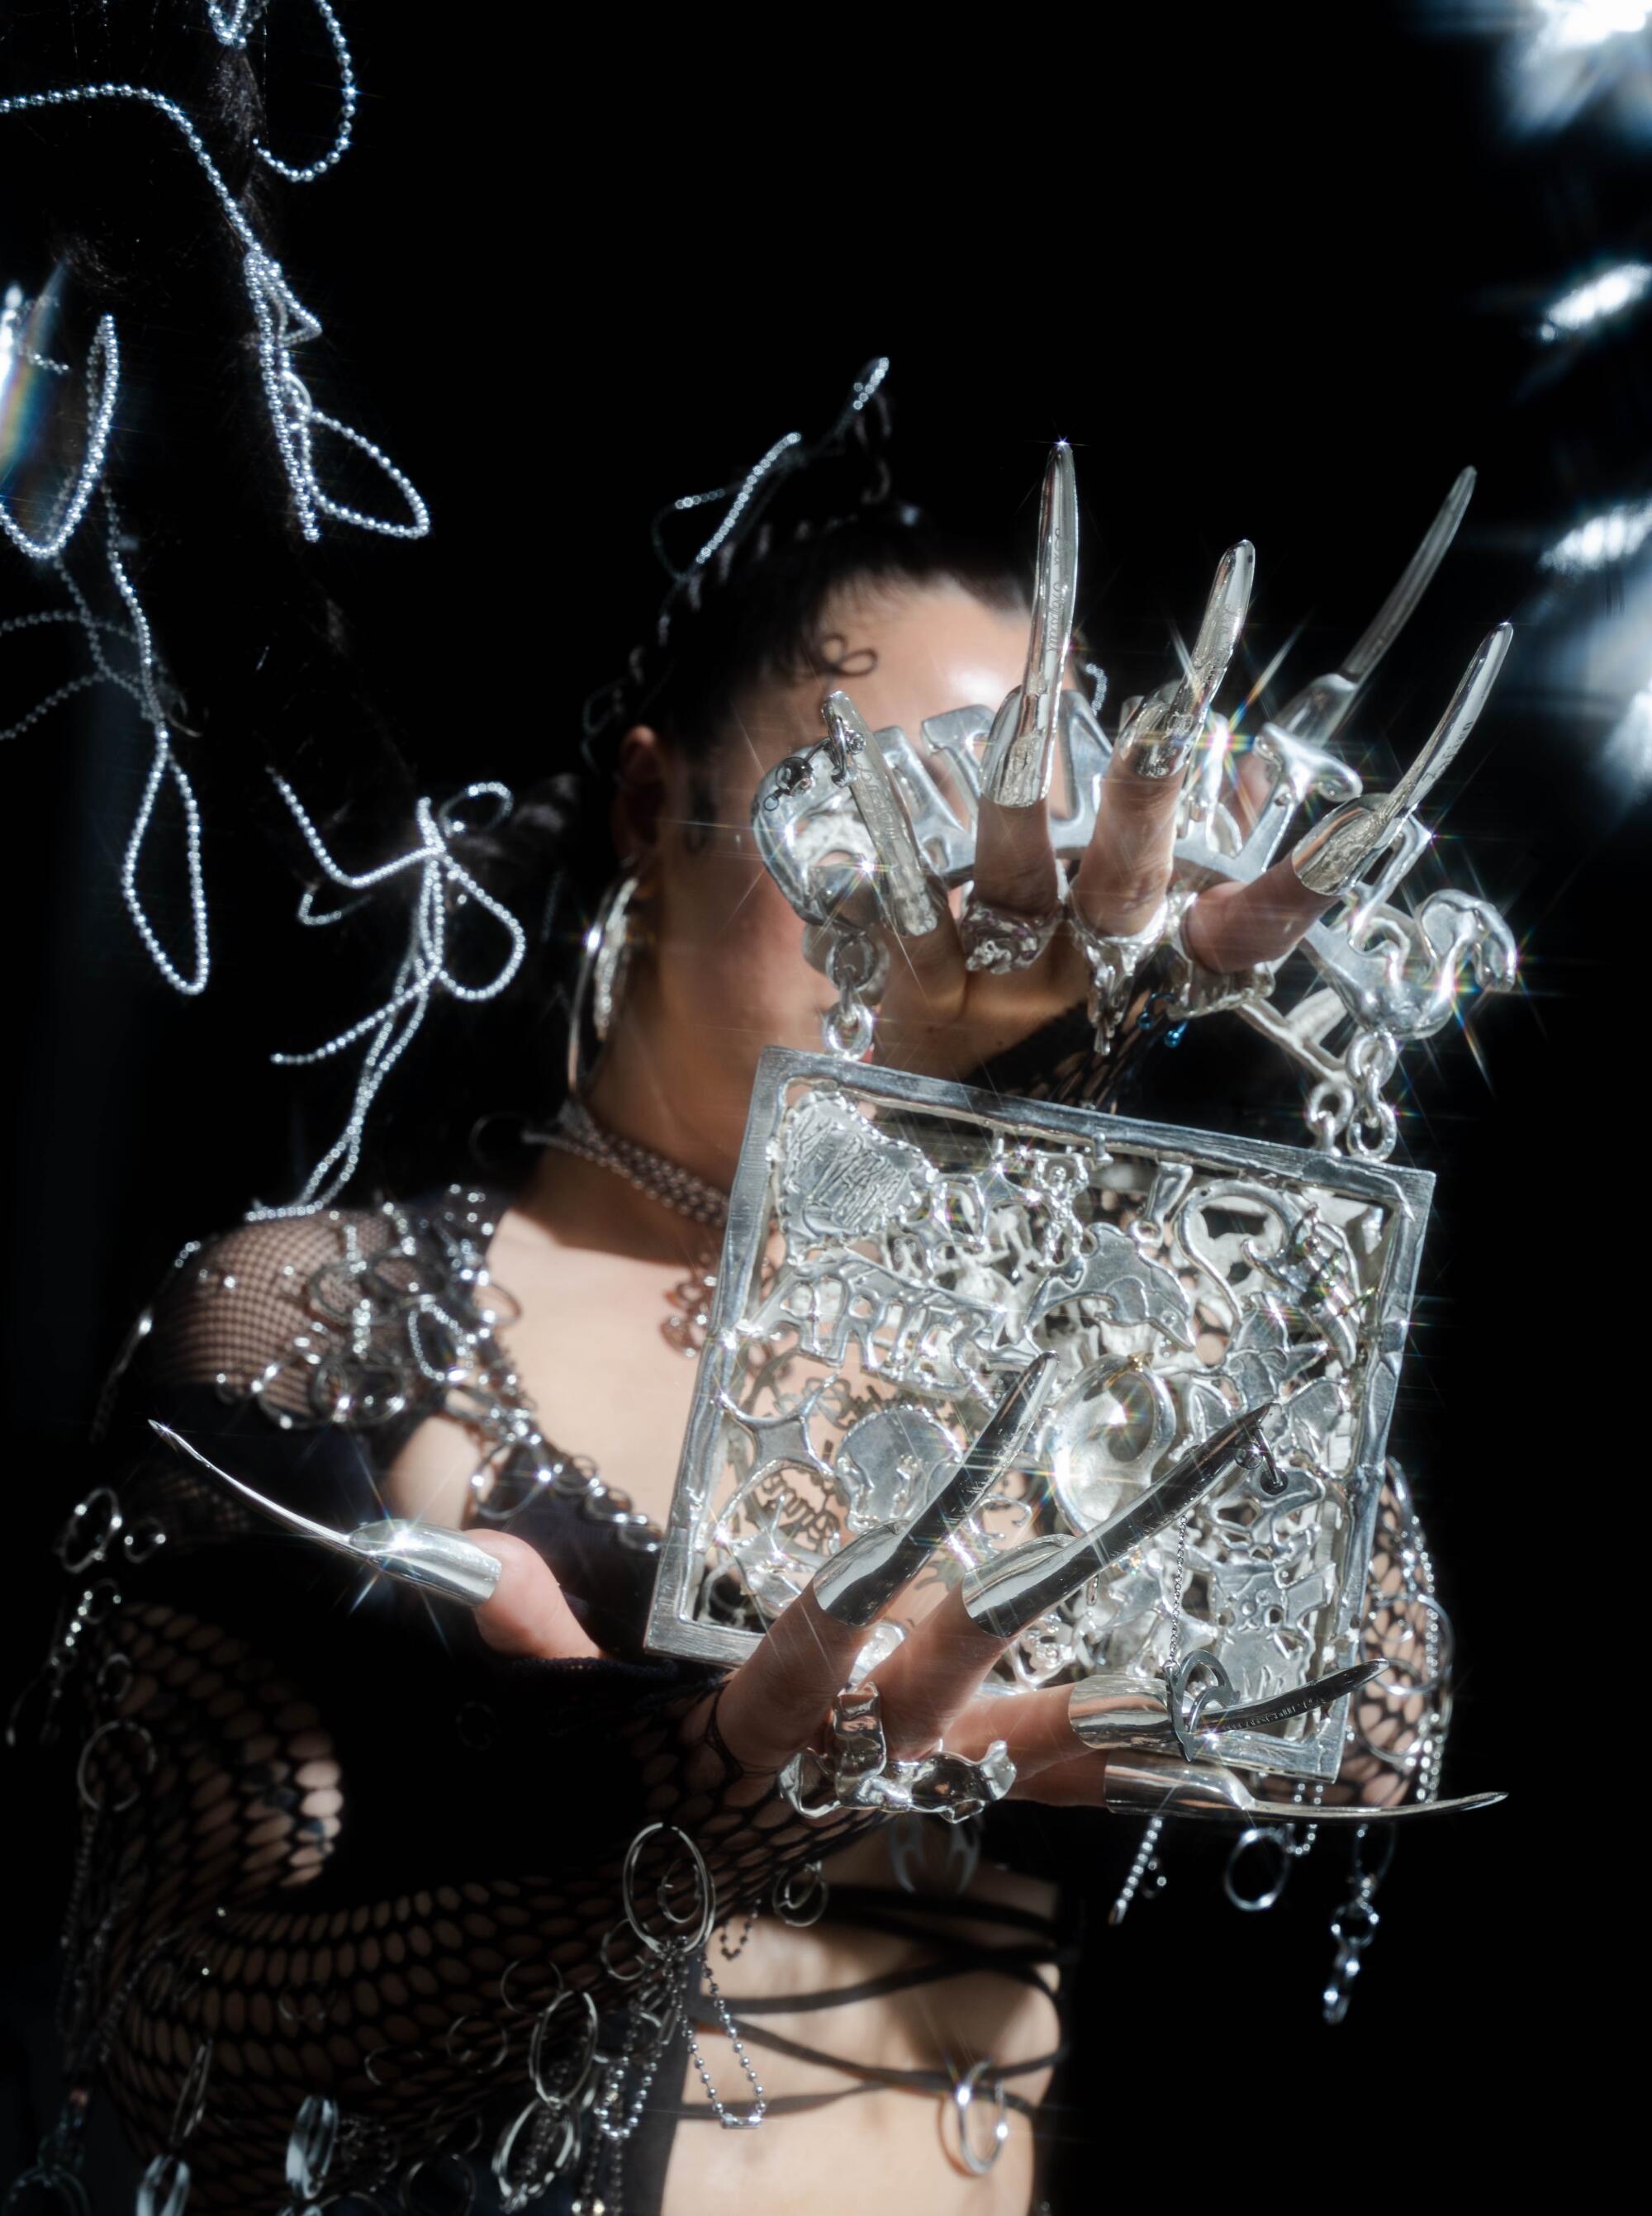 Photo of “KEPERRA” — a sterling silver casted purse made by Georgina Trevio for Image magazine.